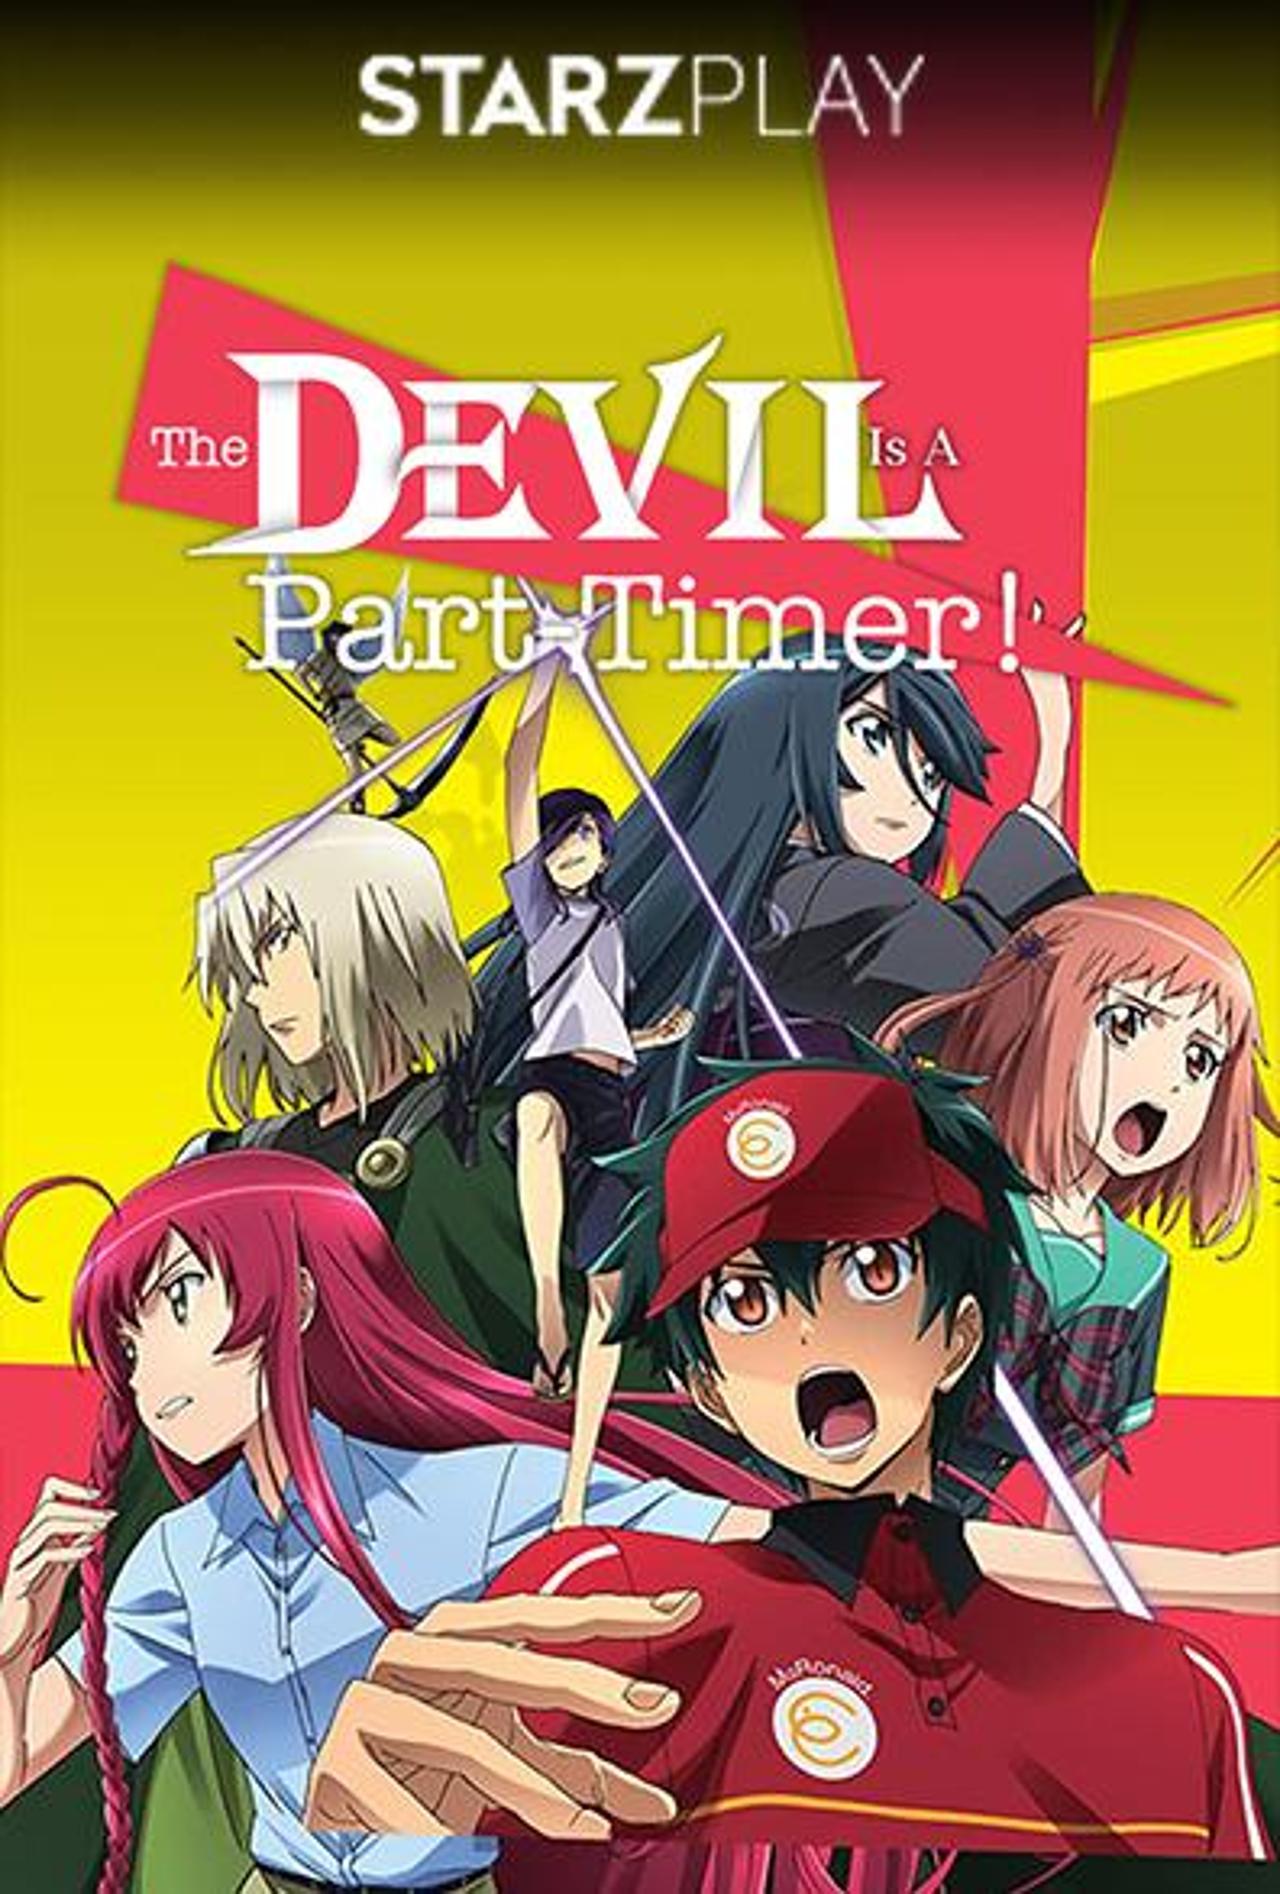 Where to watch The Devil Is a Part-Timer! TV series streaming